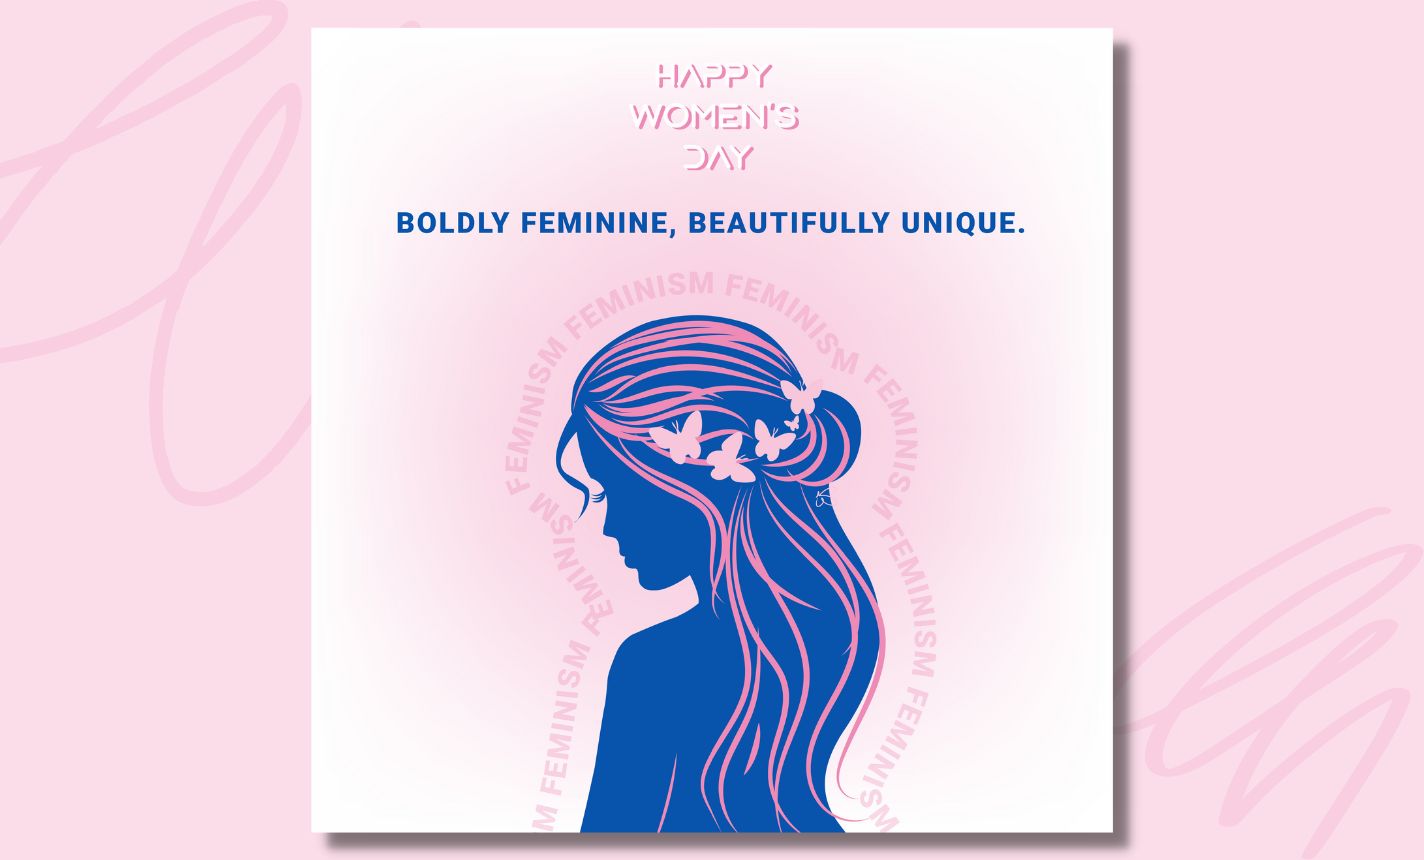 Woman's day card with a silhouette of a woman's head.